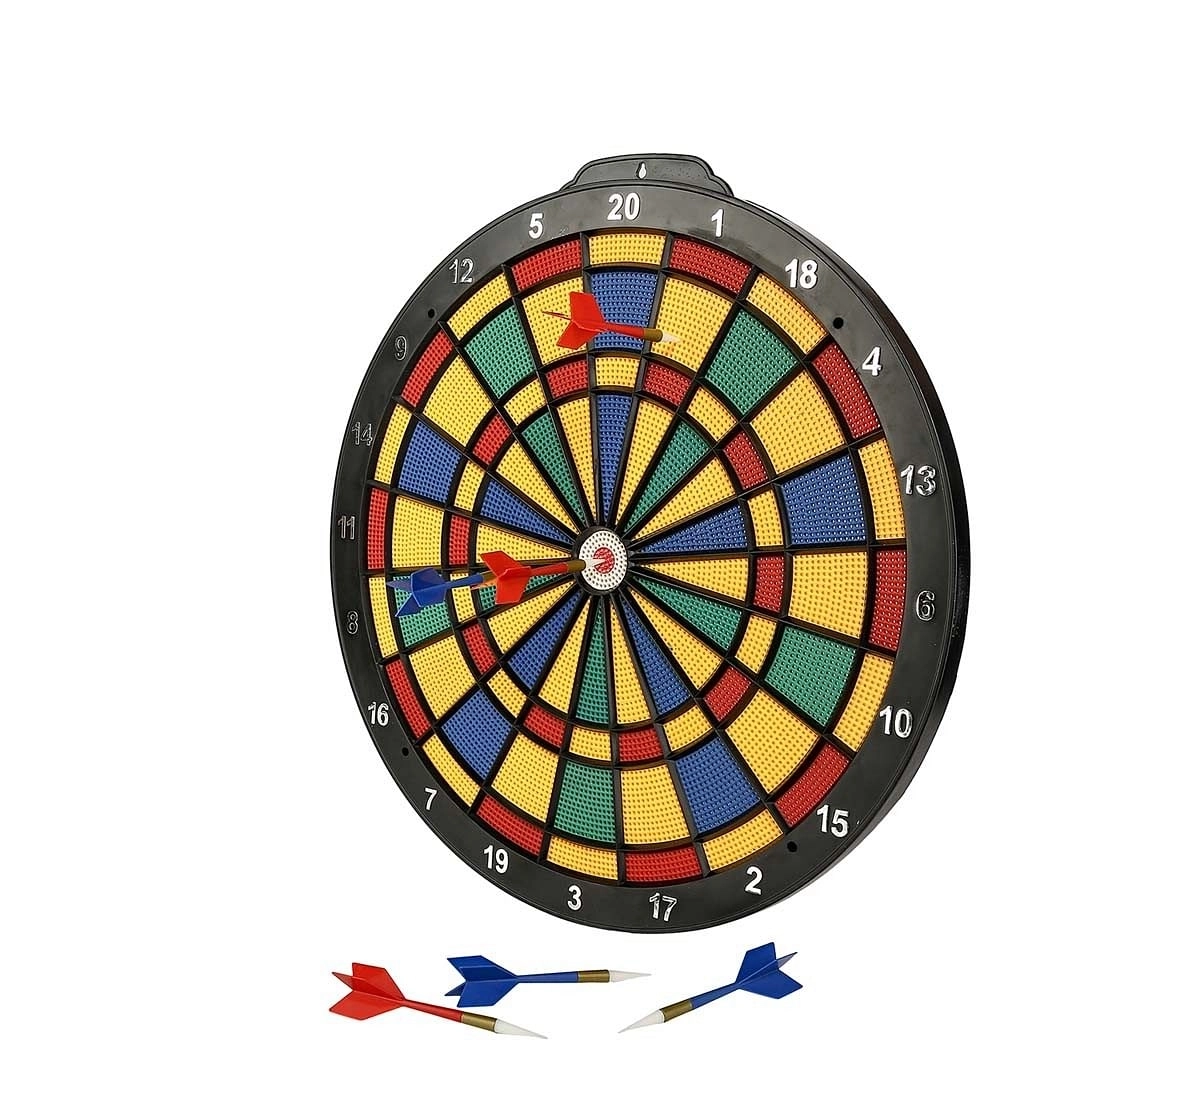 Comdaq Dart Game, Multi Color (Large) Indoor Sports for Kids age 4Y+ 